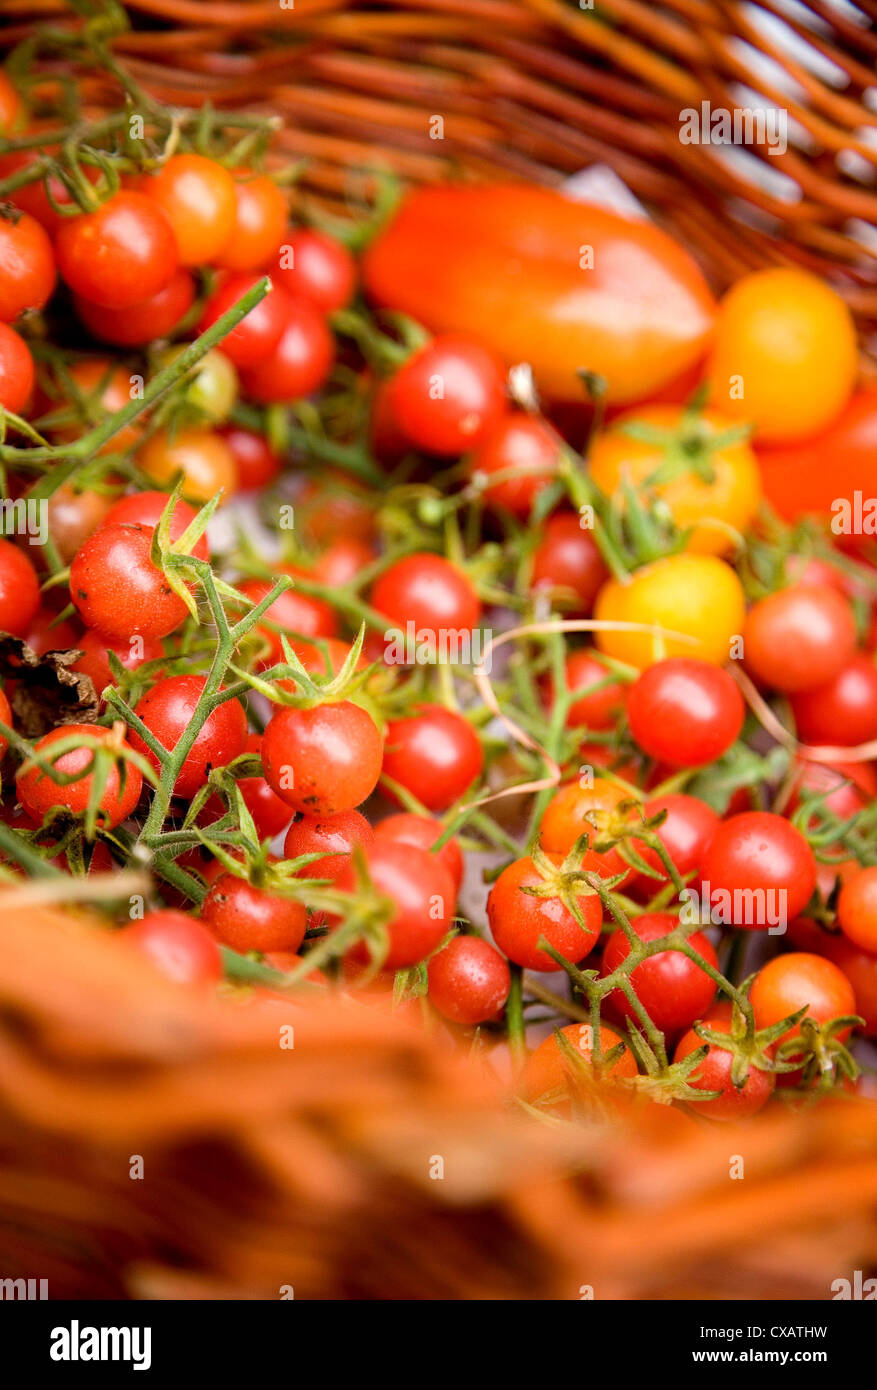 Riedlingen, tomatoes at a farmers market Stock Photo